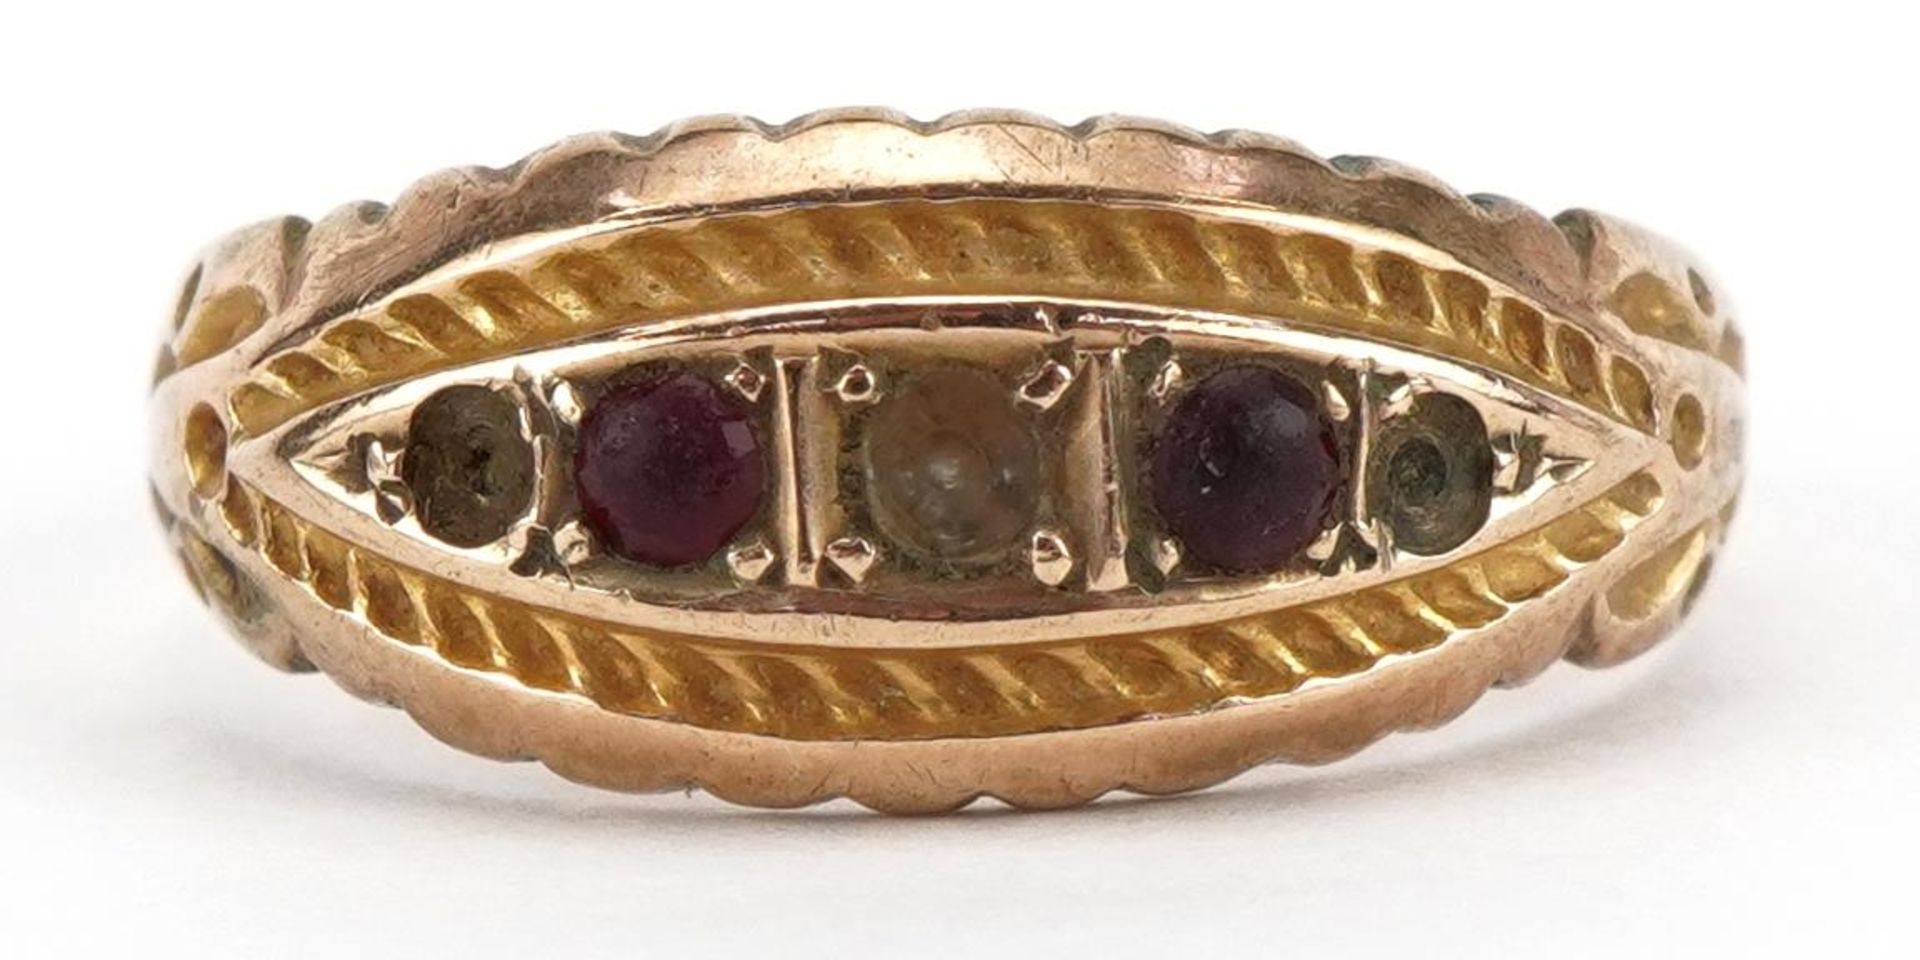 Edwardian 9ct gold boat ring set with two red stones, Chester 1902, size M, 1.9g